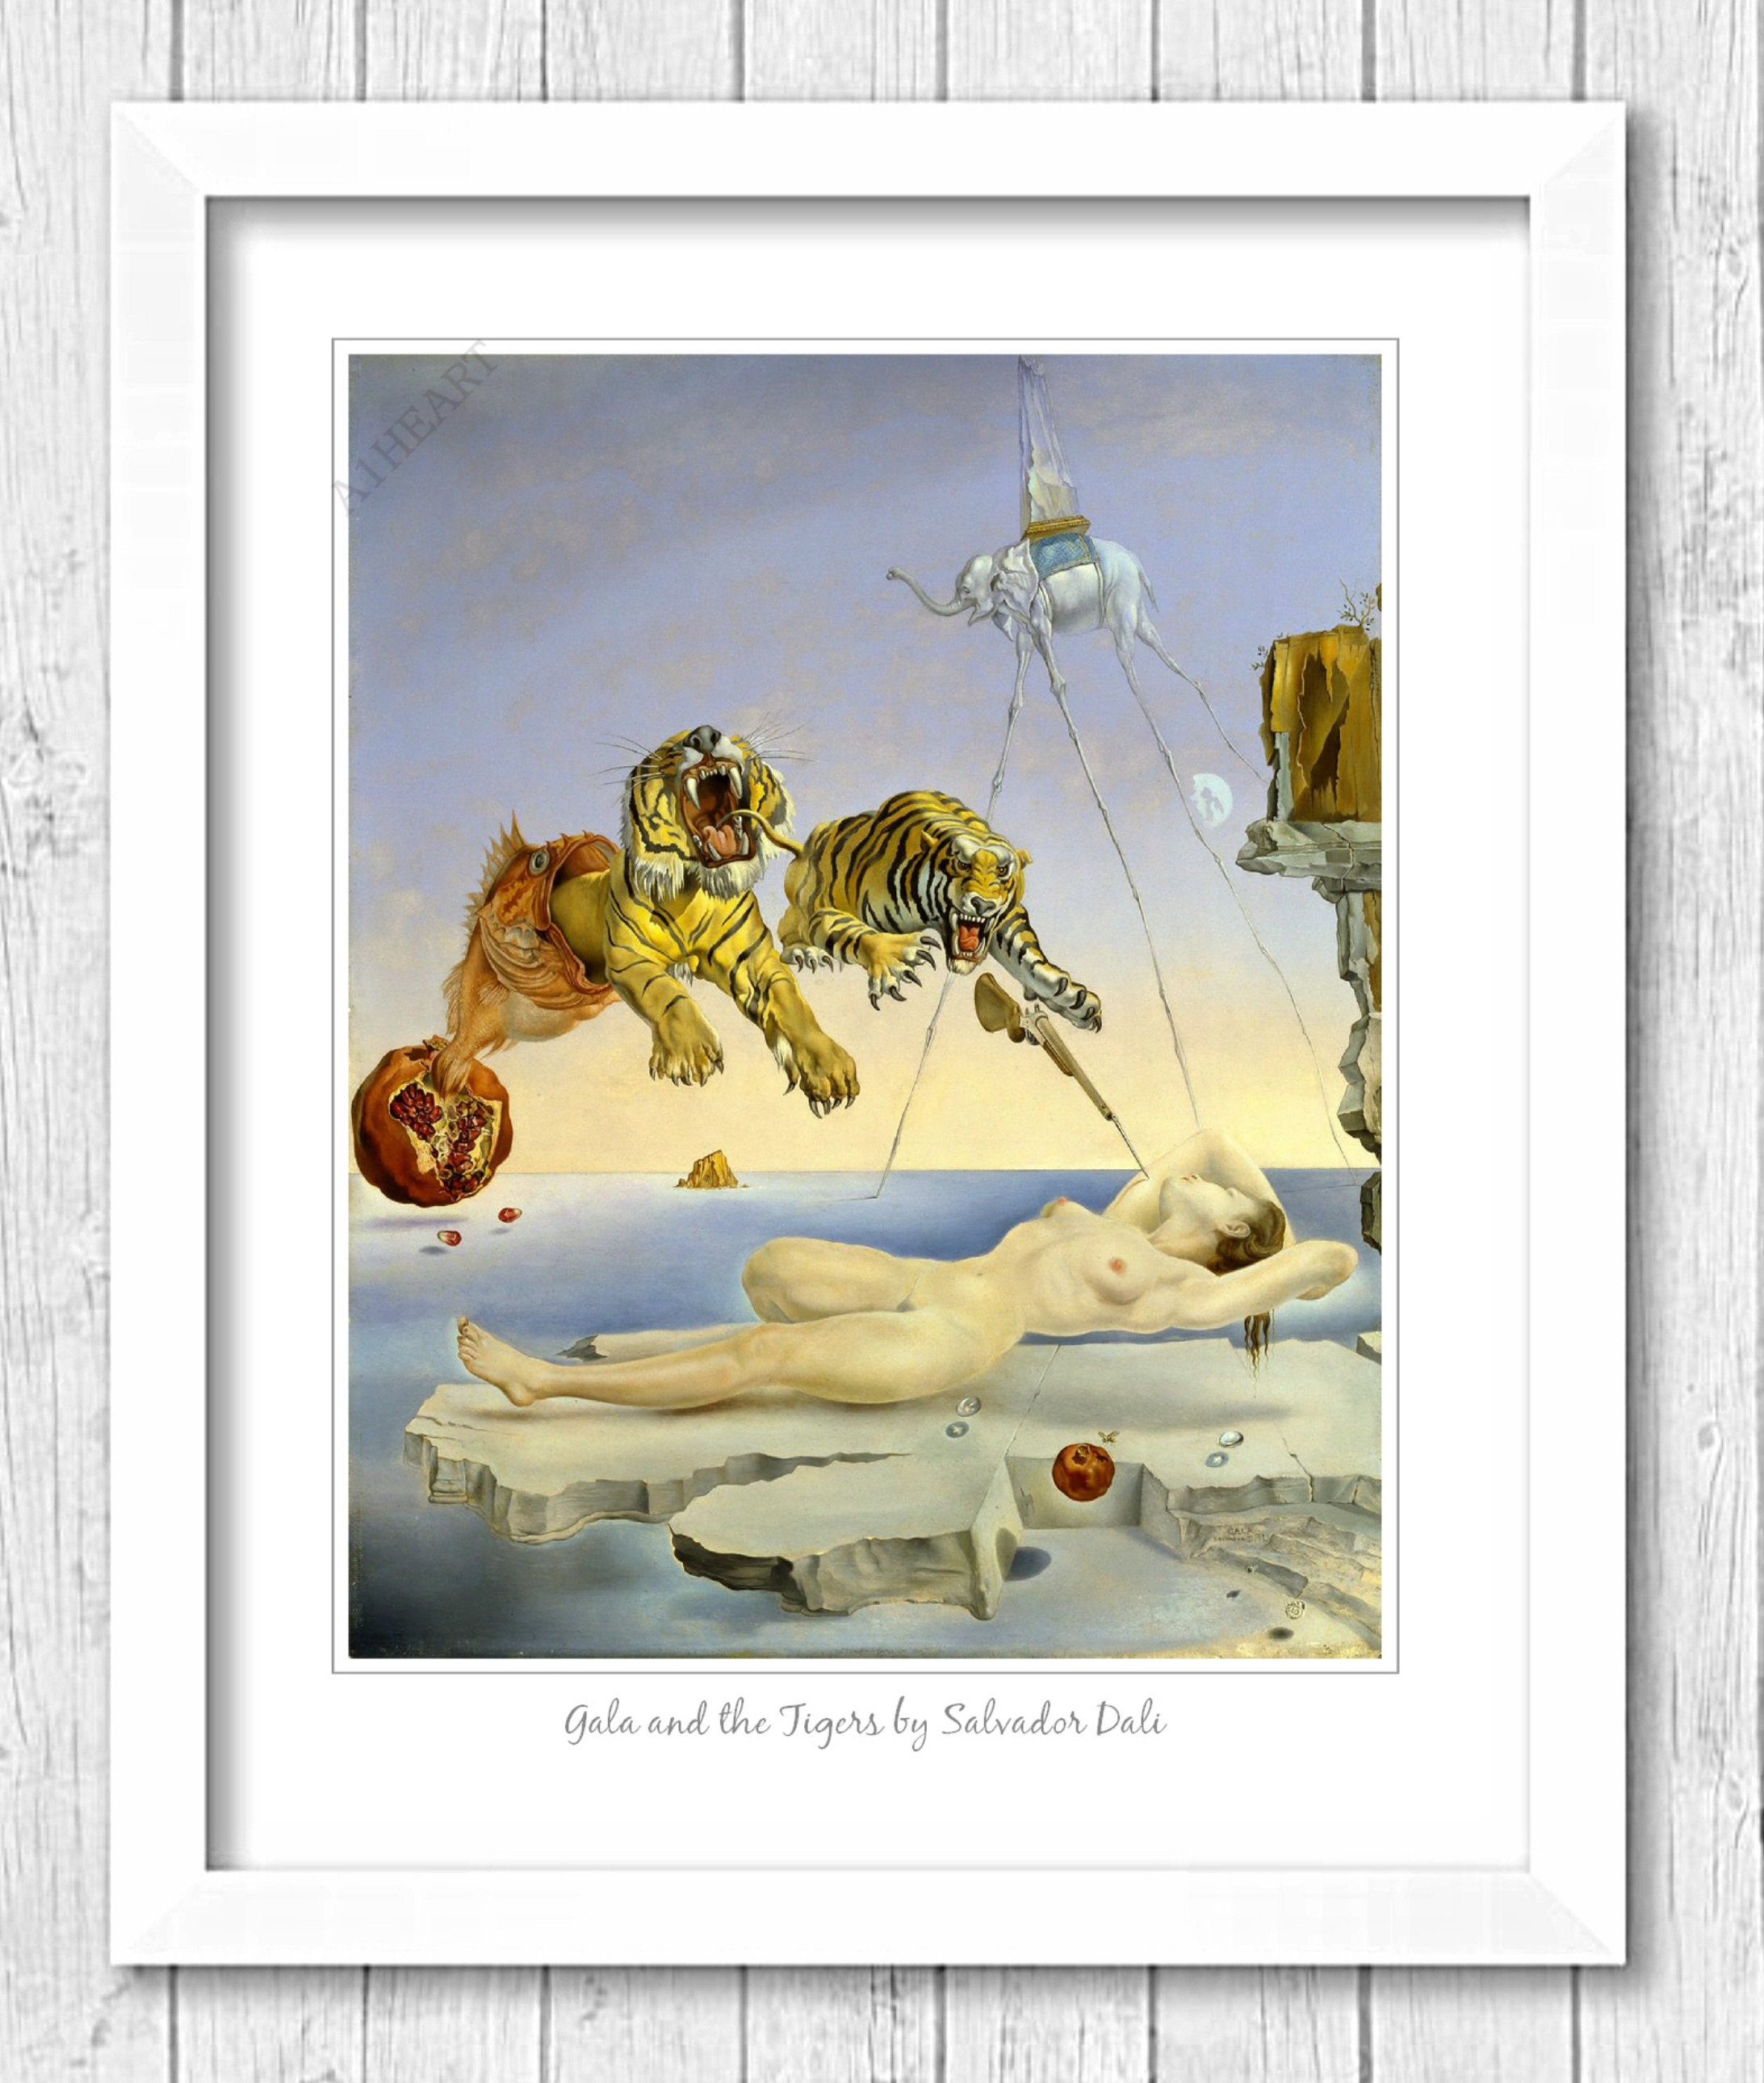 Gala and the Tigers by Salvador Dali Print Poster